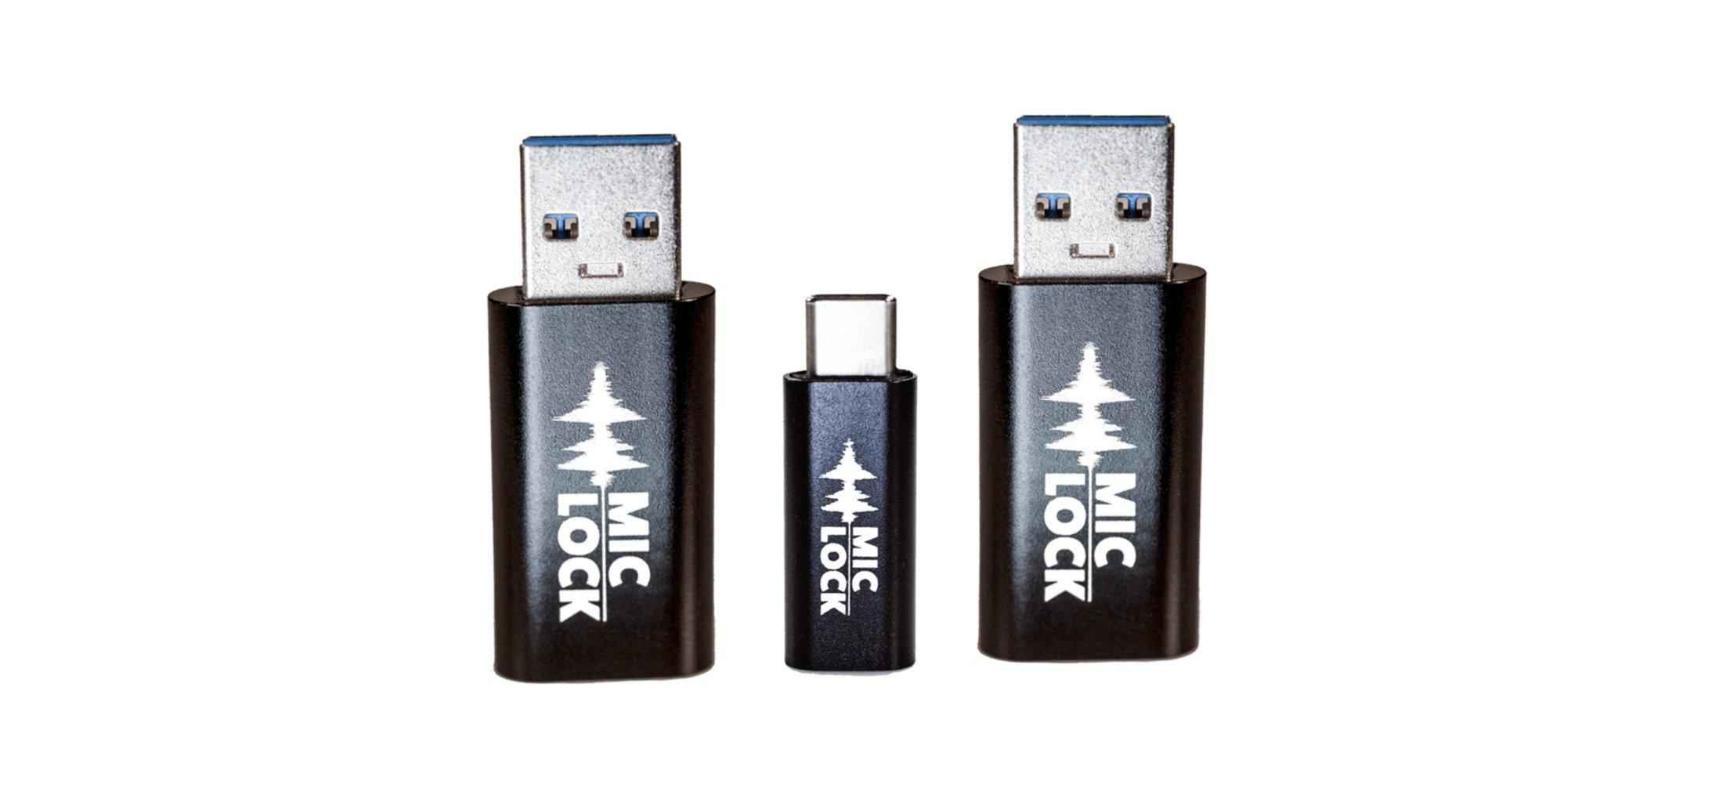 Mic-Lock® Secure Chargers